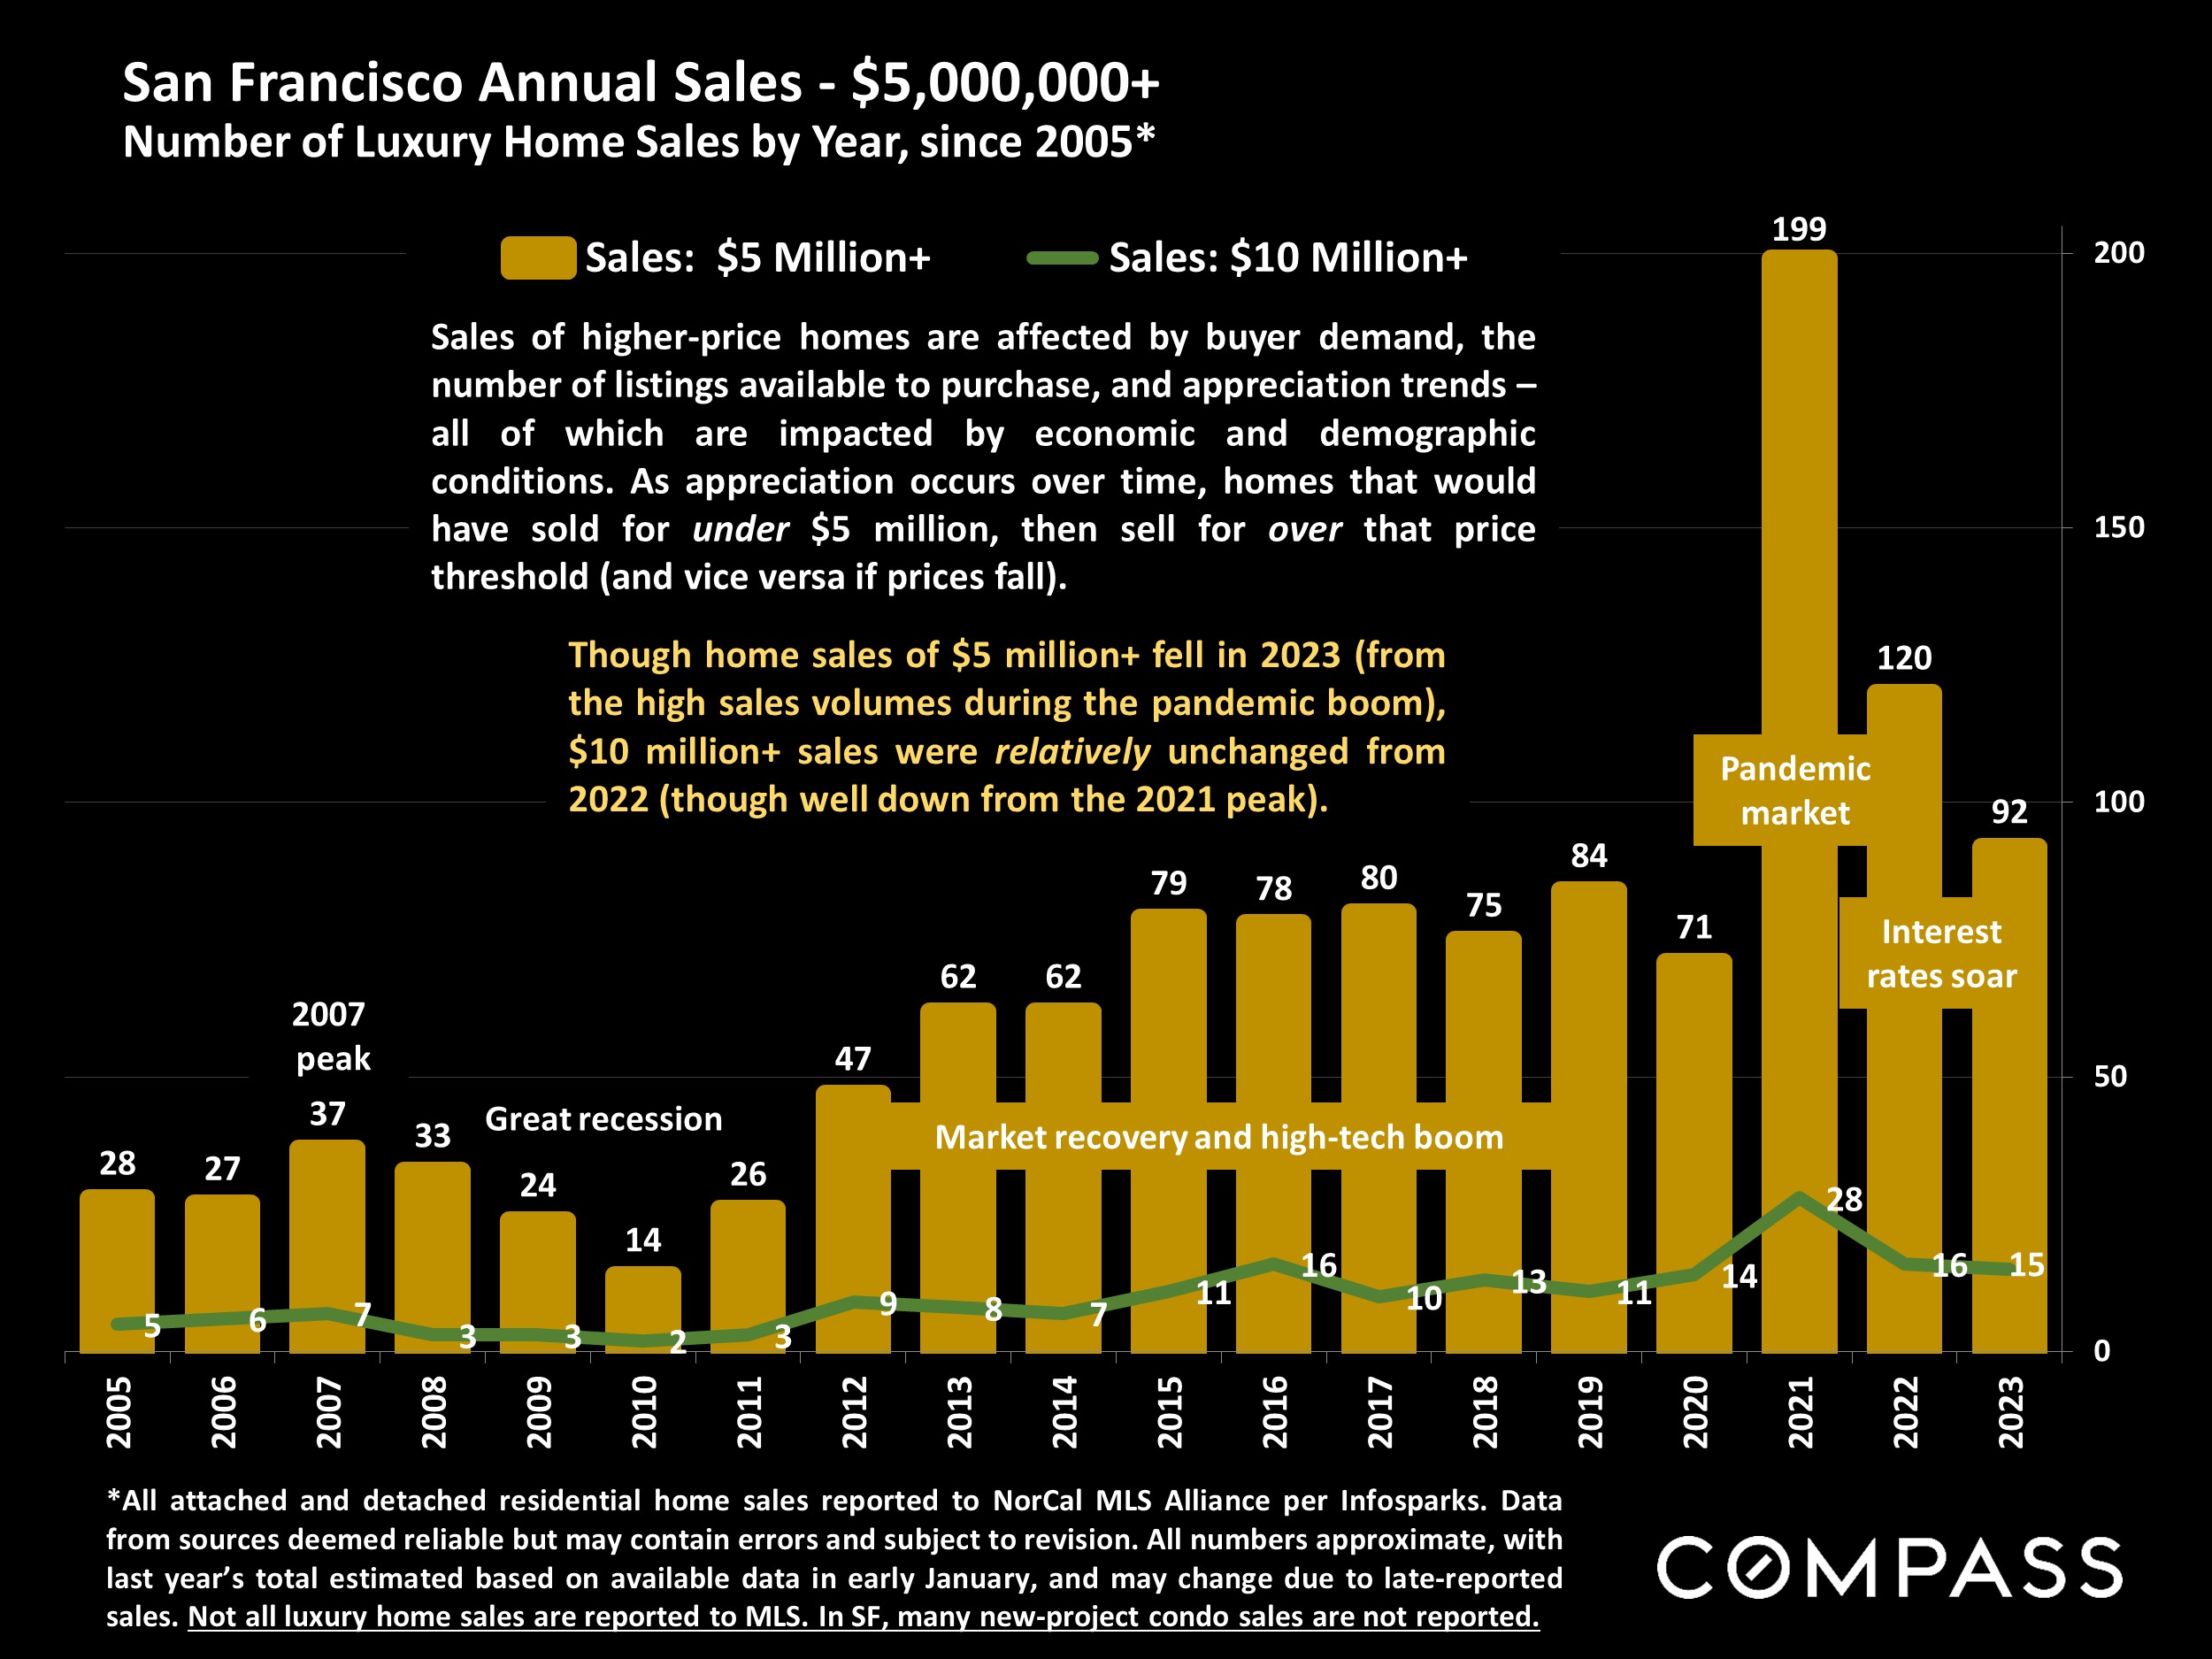 San Francisco Annual Sales - $5,000,000+ Number of Luxury Home Sales by Year, since 2005*